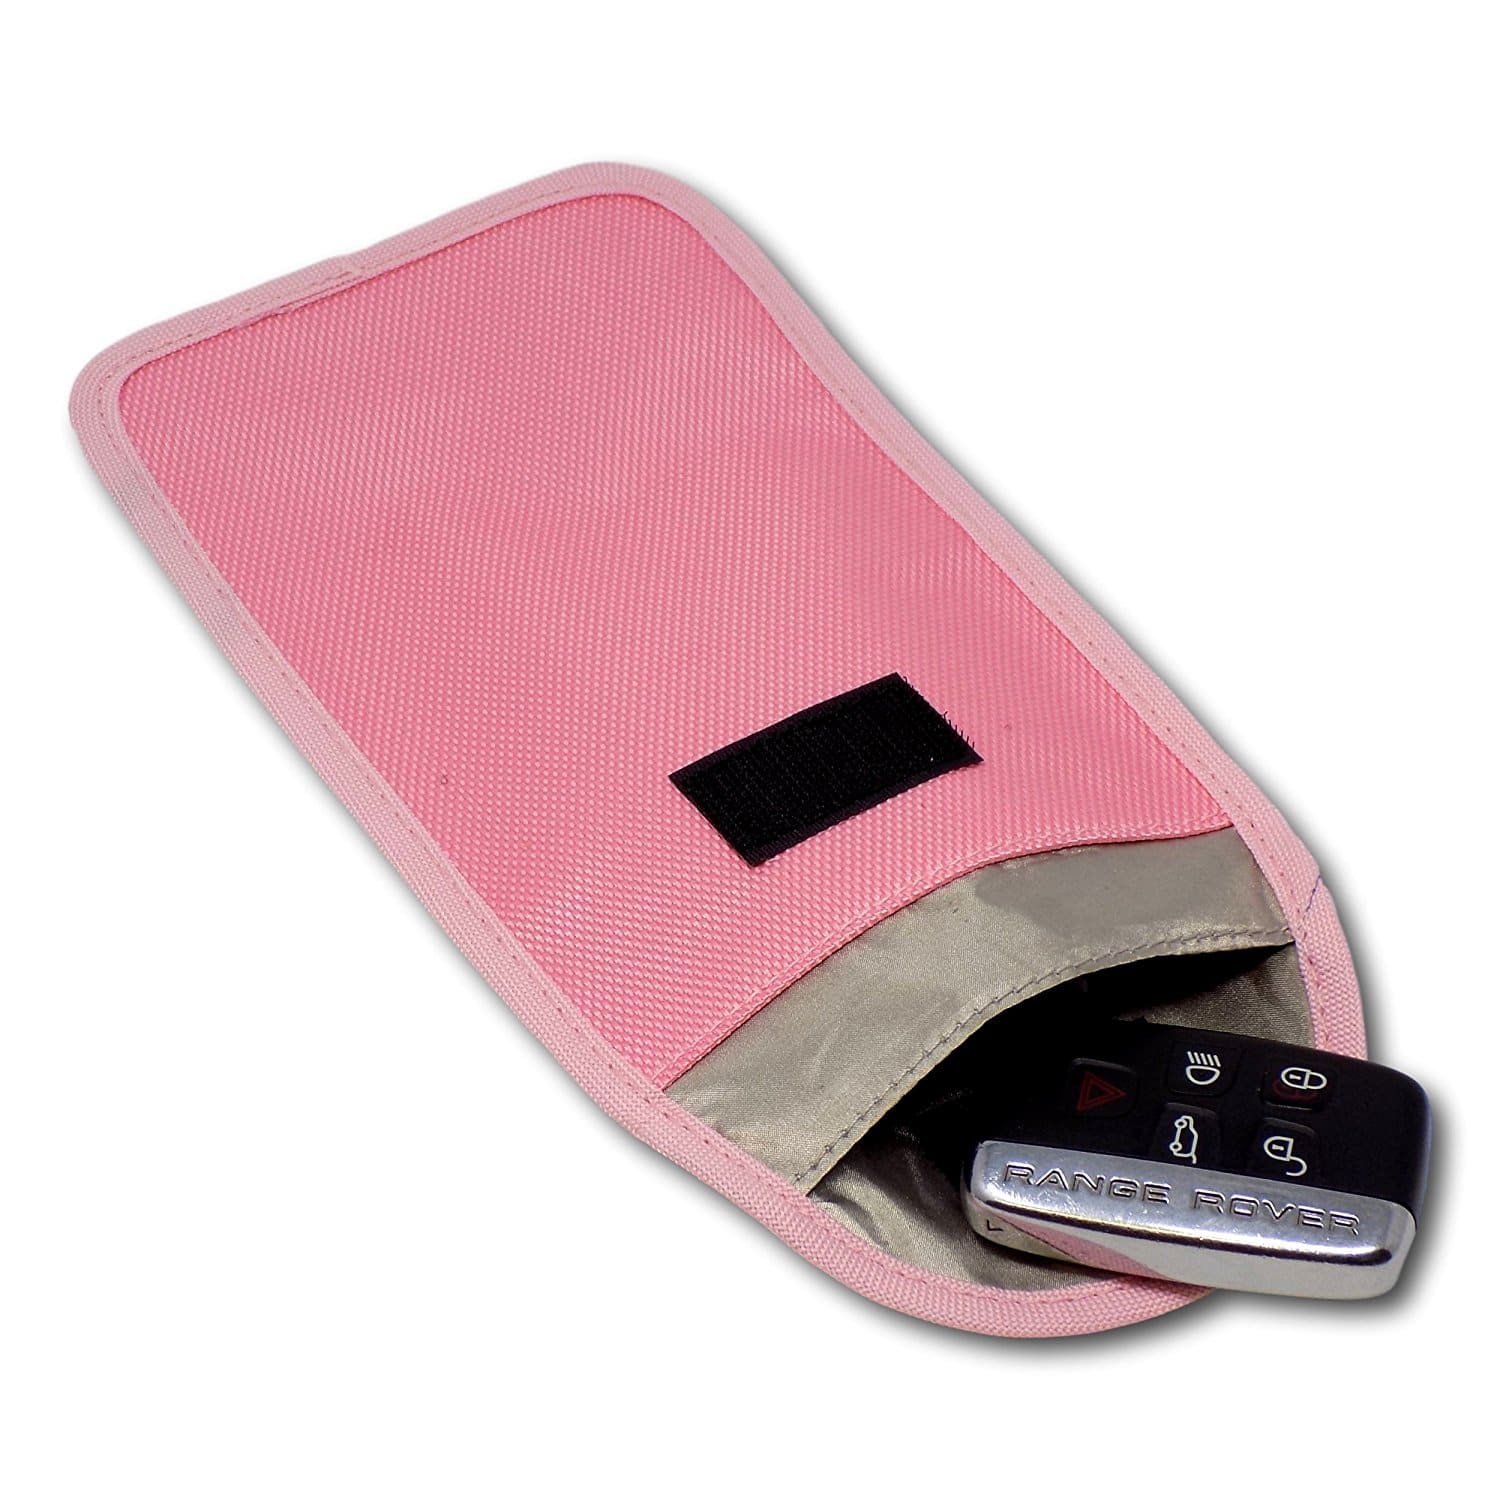 Review of Minder Signal Blocking Car Key Pouch